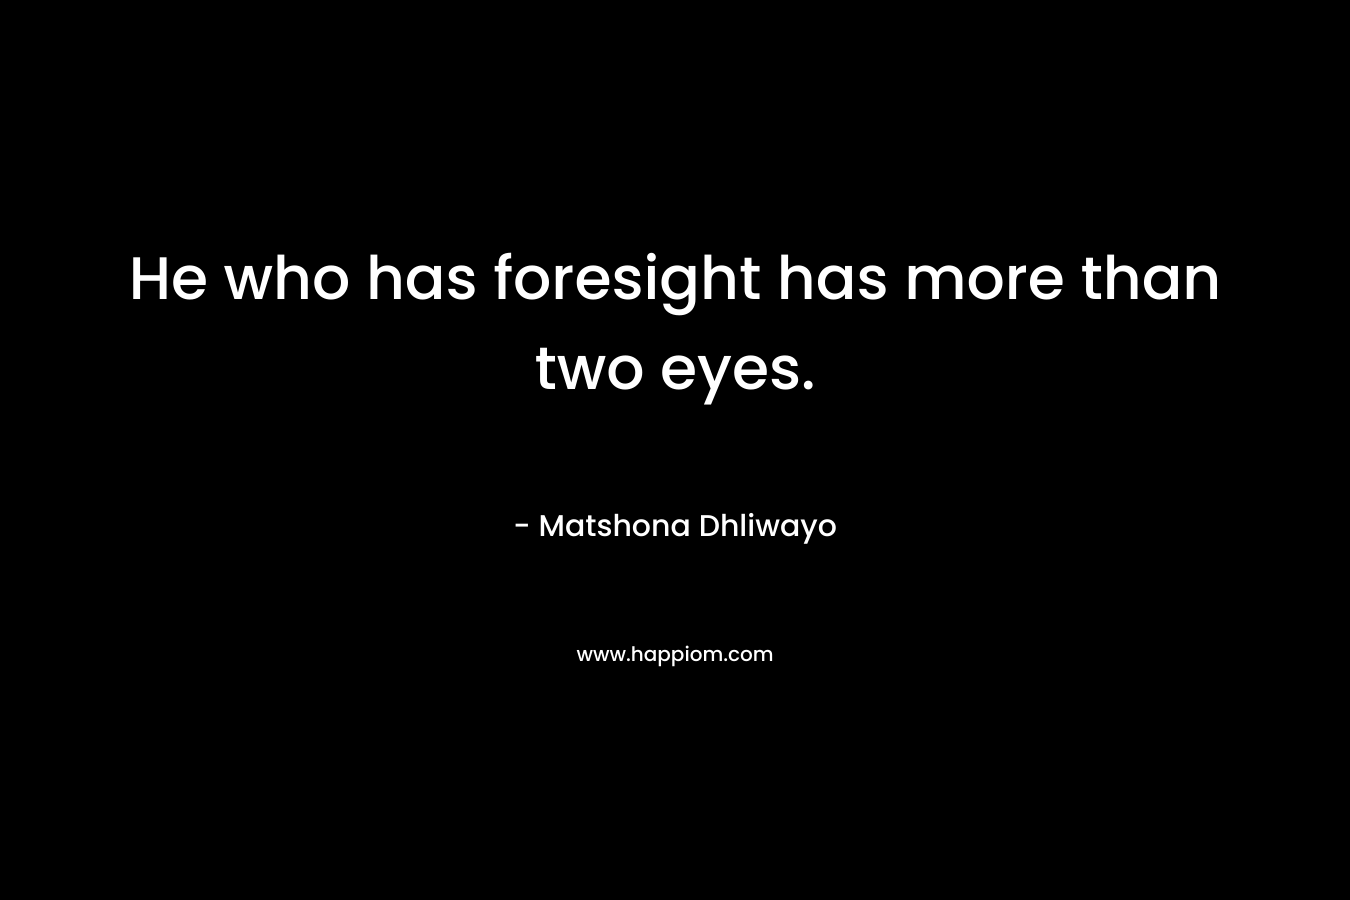 He who has foresight has more than two eyes.